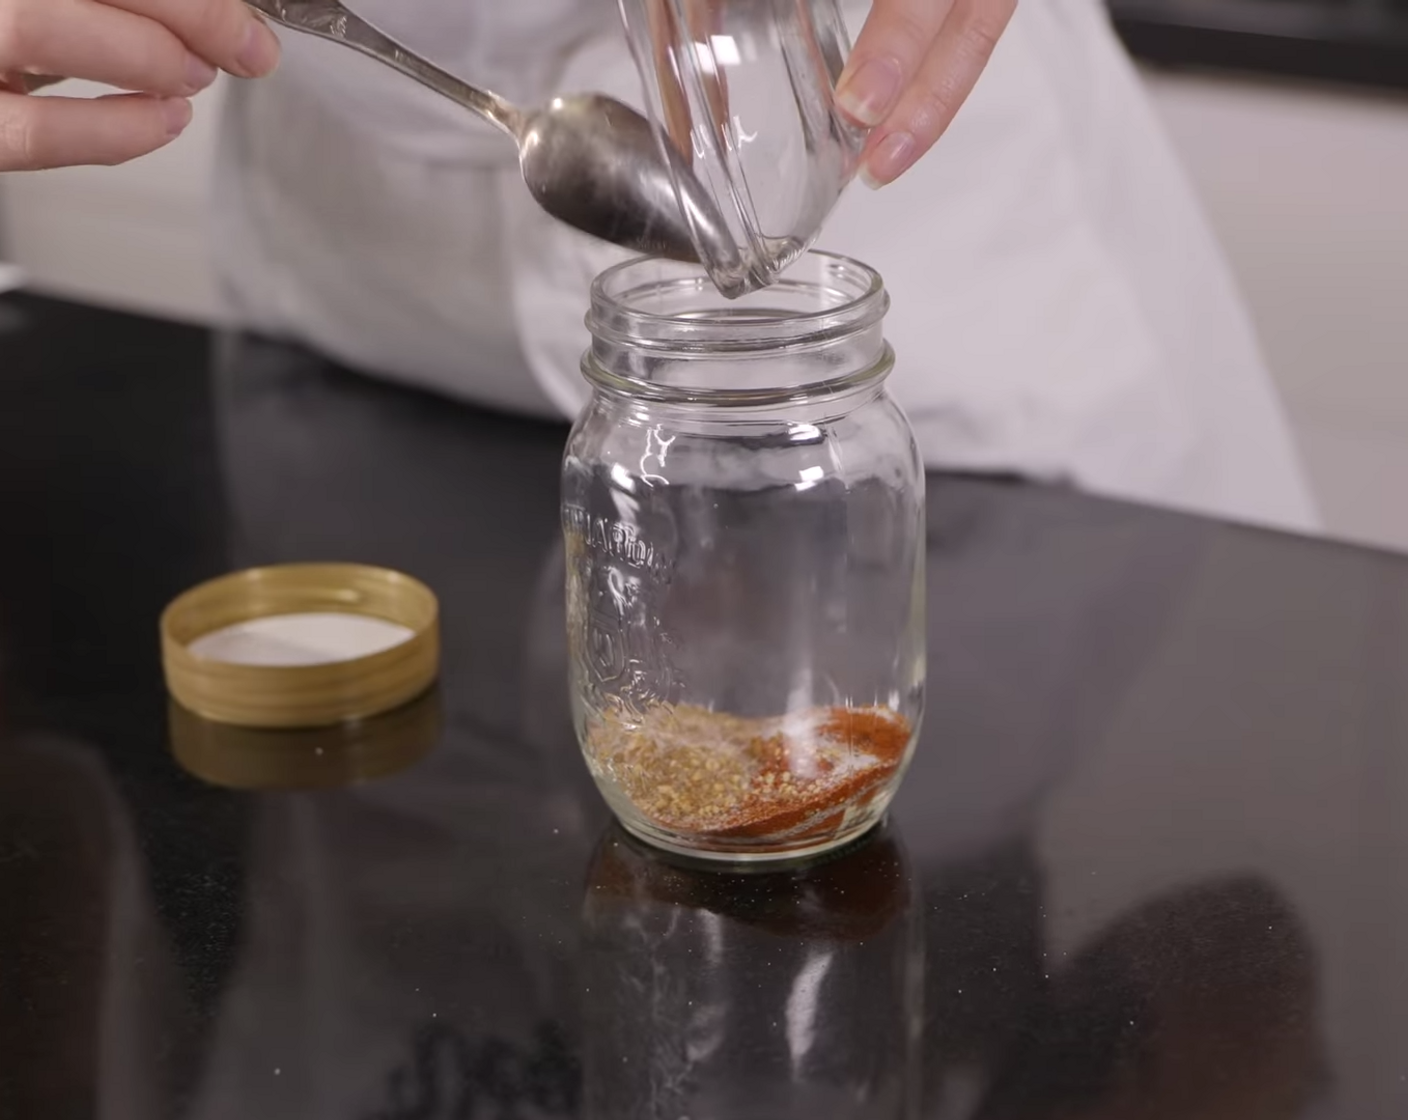 step 10 Meanwhile, make your dry rub. In a small jar, add Kosher Salt (1 tsp), Coarse Black Pepper (1 tsp), Smoked Paprika (1 tsp), Granulated Garlic (1 tsp), Ground Cumin (1/2 tsp), and shake to combine.